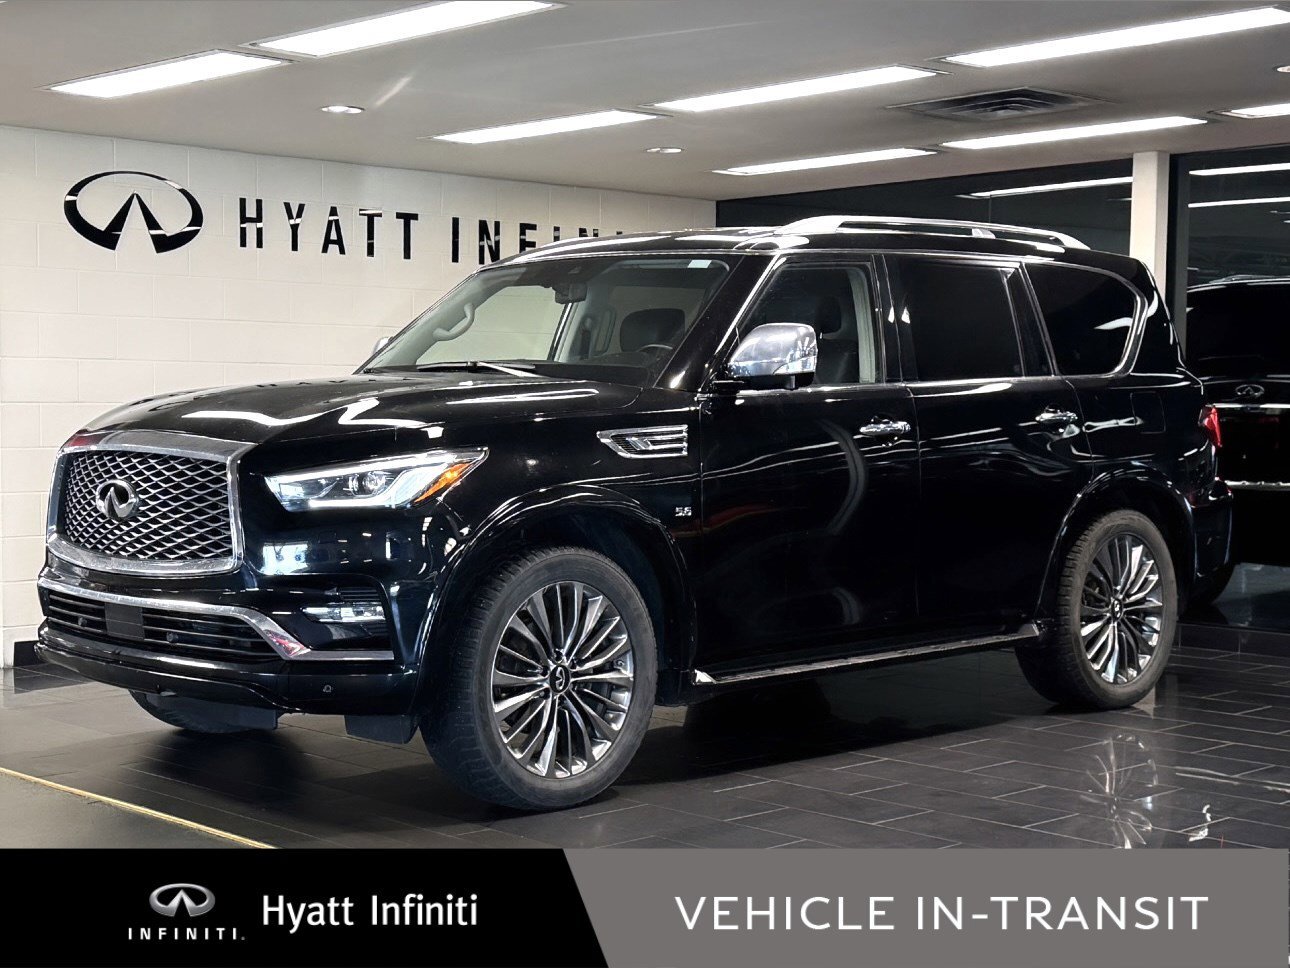 2019 Infiniti QX80 ProACTIVE - One Owner | No Accidents | Trailer Tow